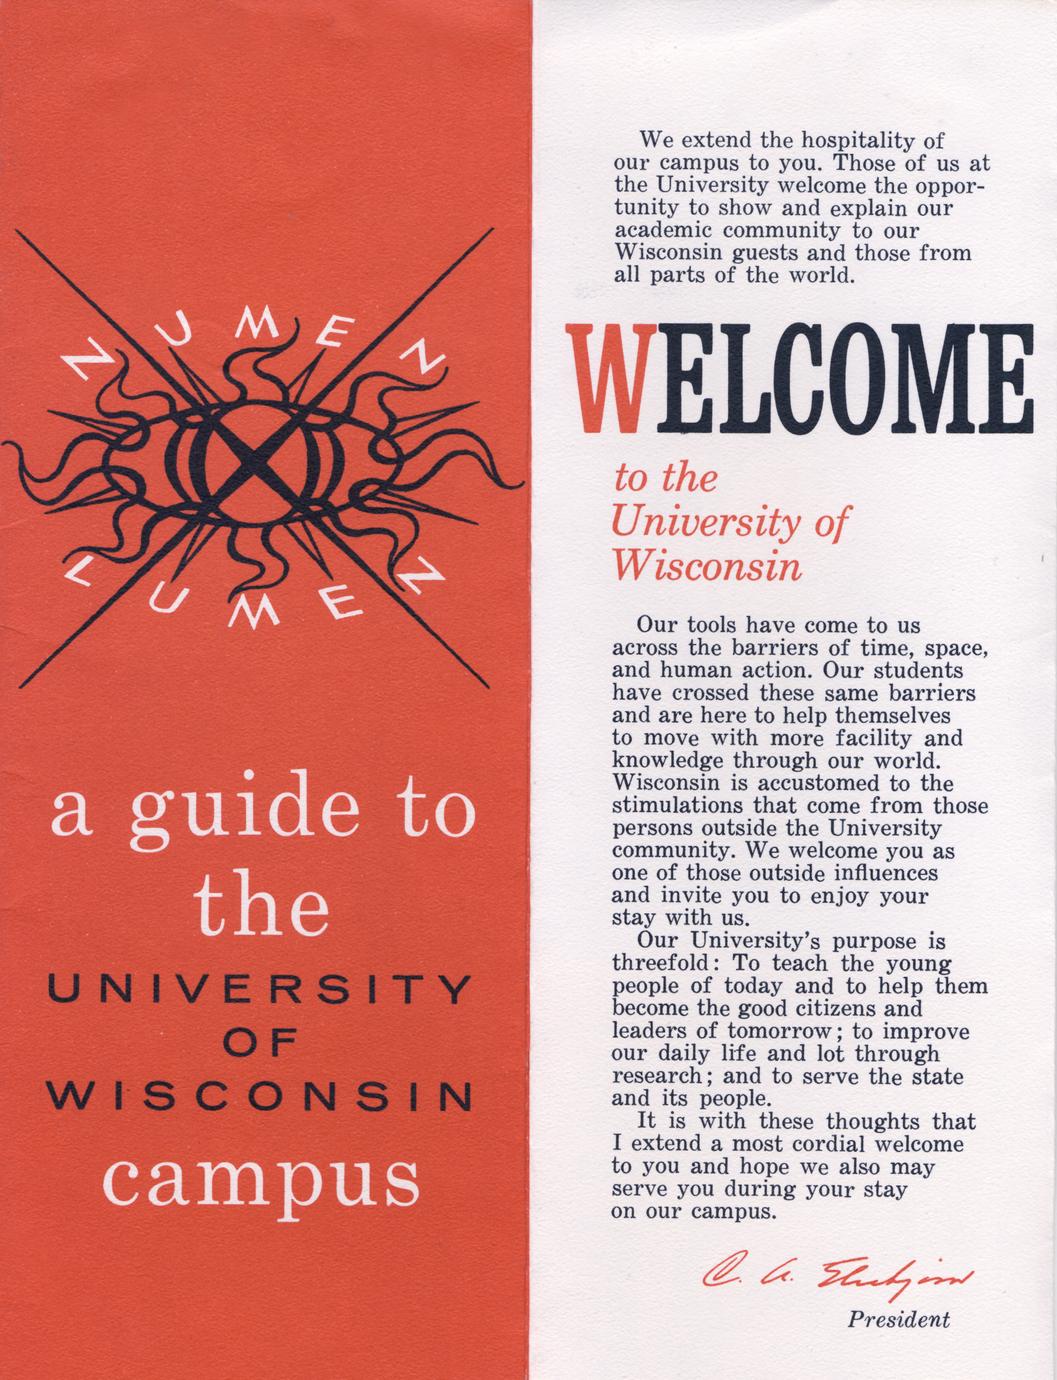 "A guide to the University of Wisconsin campus"